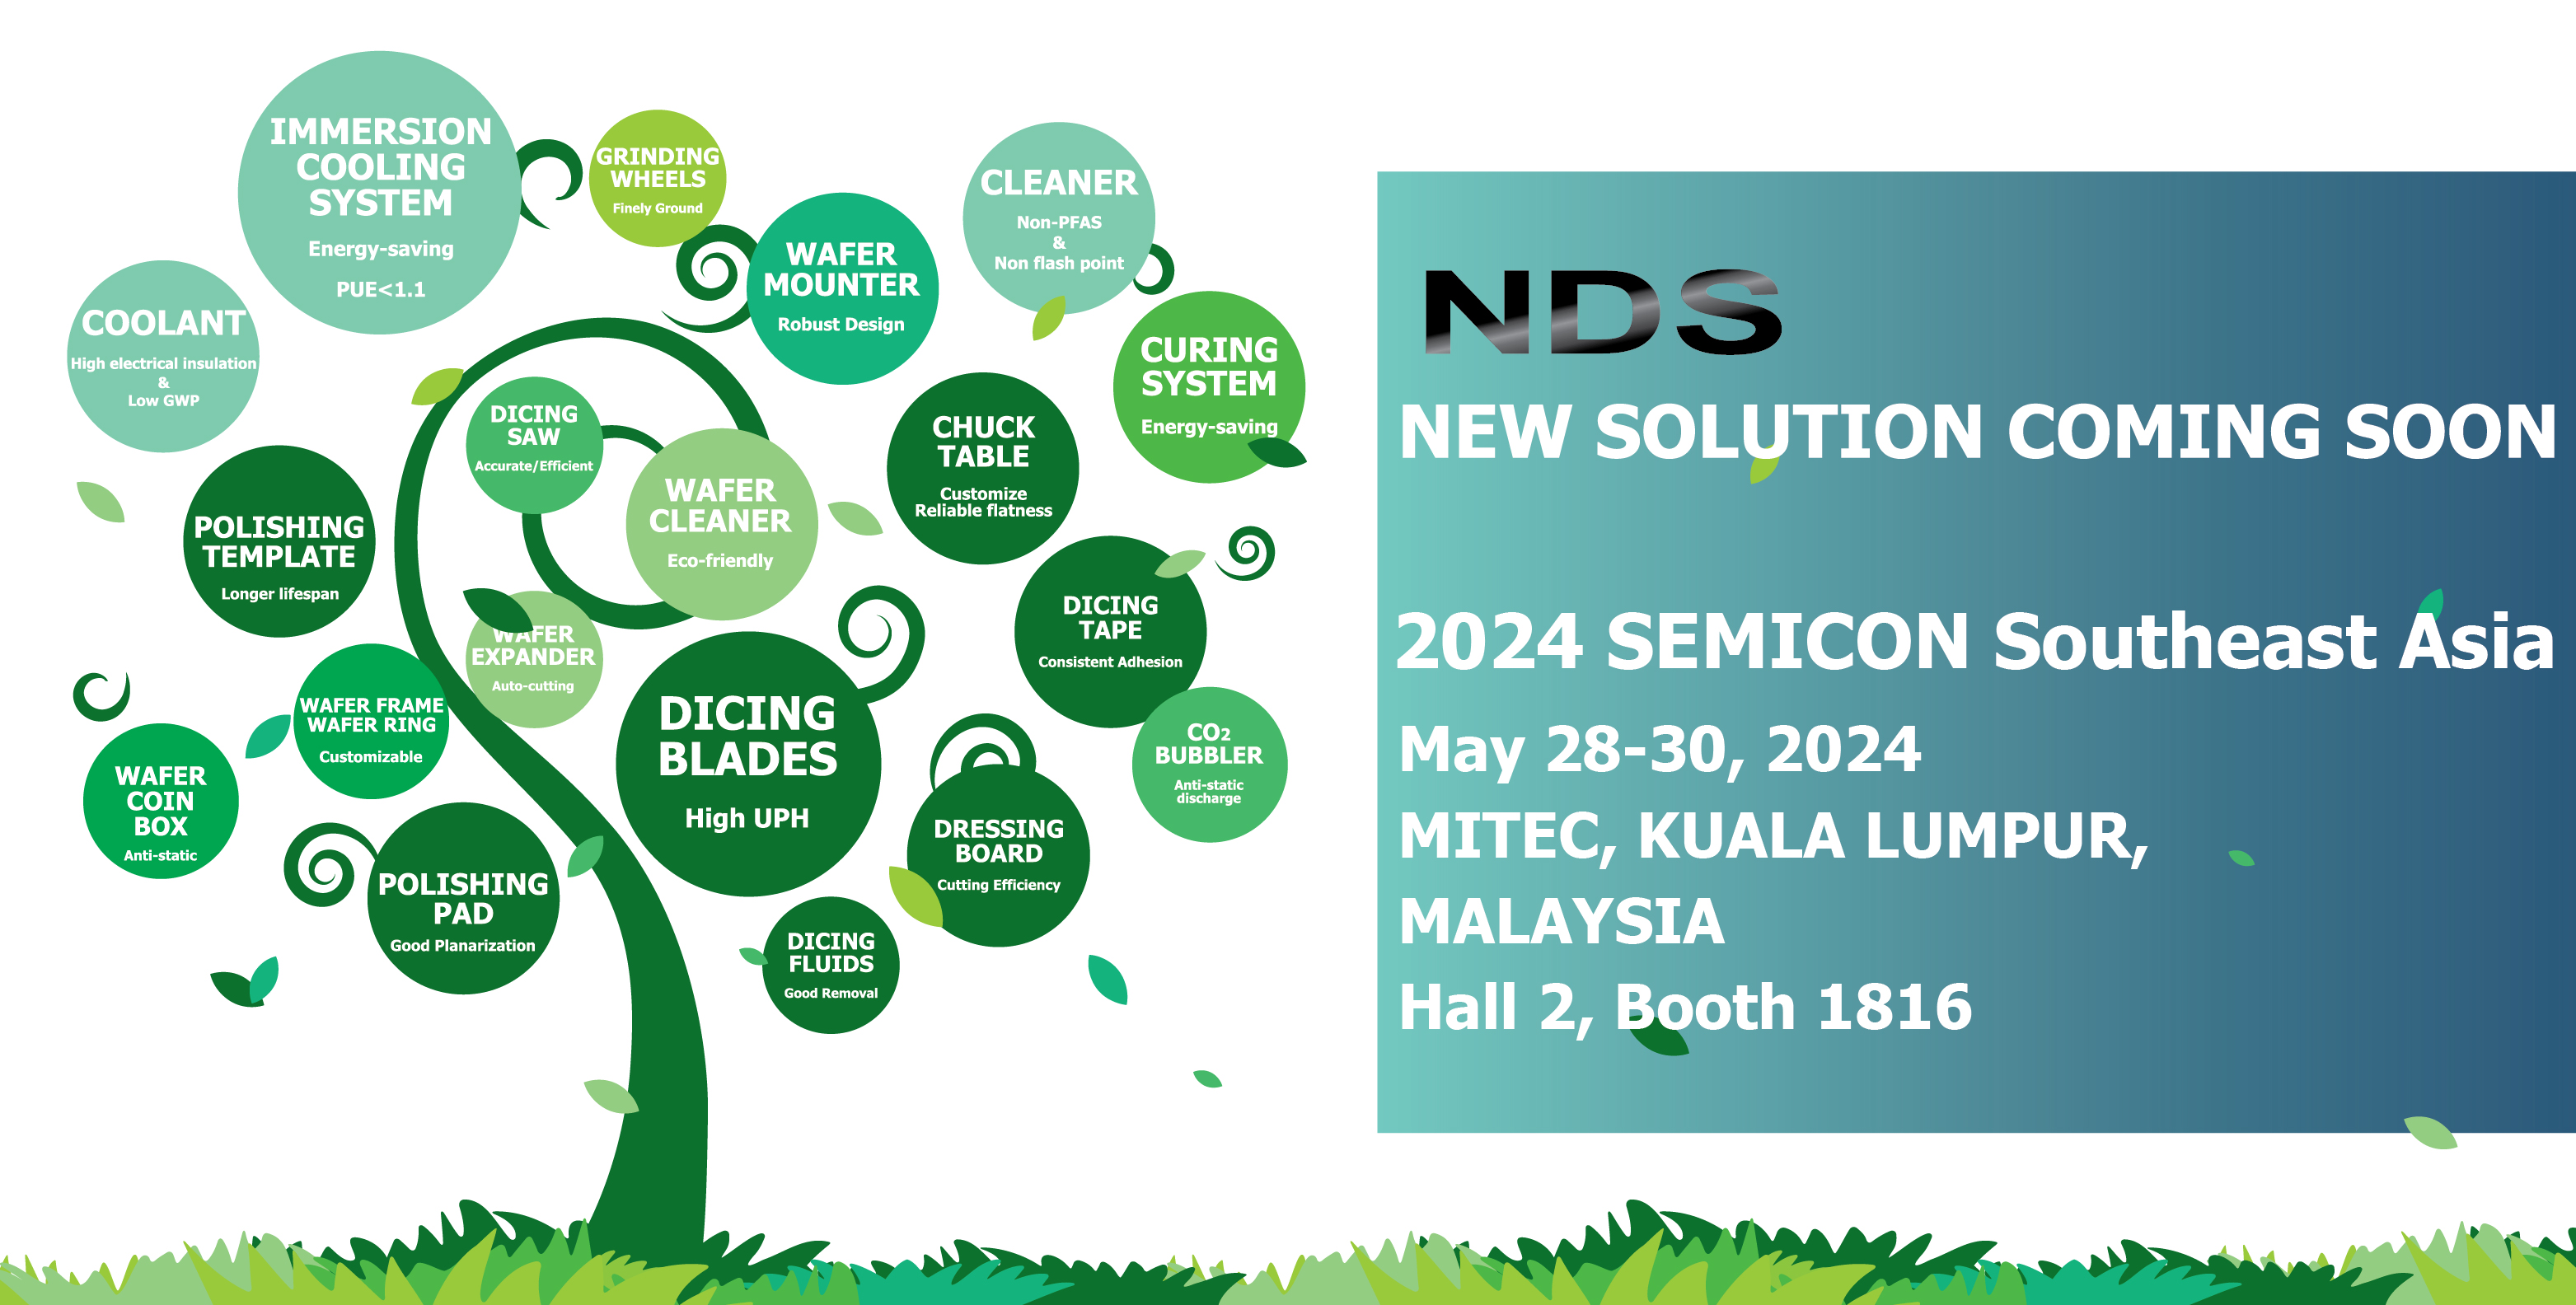 NDS 台灣日脈, NDS Immersion Cooling System, NDS Dicing Service Center Taiwan, Totally Dicing, Dicing Saw, Automatic Dicing Saw, NDS Dicing System, Dicing Tape, Dicing Blades, Grinding Wheel, Dicing Accessories, Auxiliary Machines, Dicing Fluids, Wafer Cleaner, Dressing Board, Cguck Table, Wafer Mounter, New Metal Bond Blade for dicing system-in-package (SiP), Metal Bond Blade, system-in-package, Polishing Pad, Polishing Template, Wafer Ring, Wafer Coin Box, 3M, Inventec, PFAS-based, Green, cleaning, coating, heat dissipation, 0421, 替代3M氟化物在半導體的應用, PFAS, 氟化物, 氟化液, 3M, PFAS-based, Inventec Performance Chemicals, Inventec, 清洗, 焊接, 冷卻, 散熱, 塗佈, Coolant, Cleaning, Cooling, Soldering, Coating, Chiller, THERMASOLV